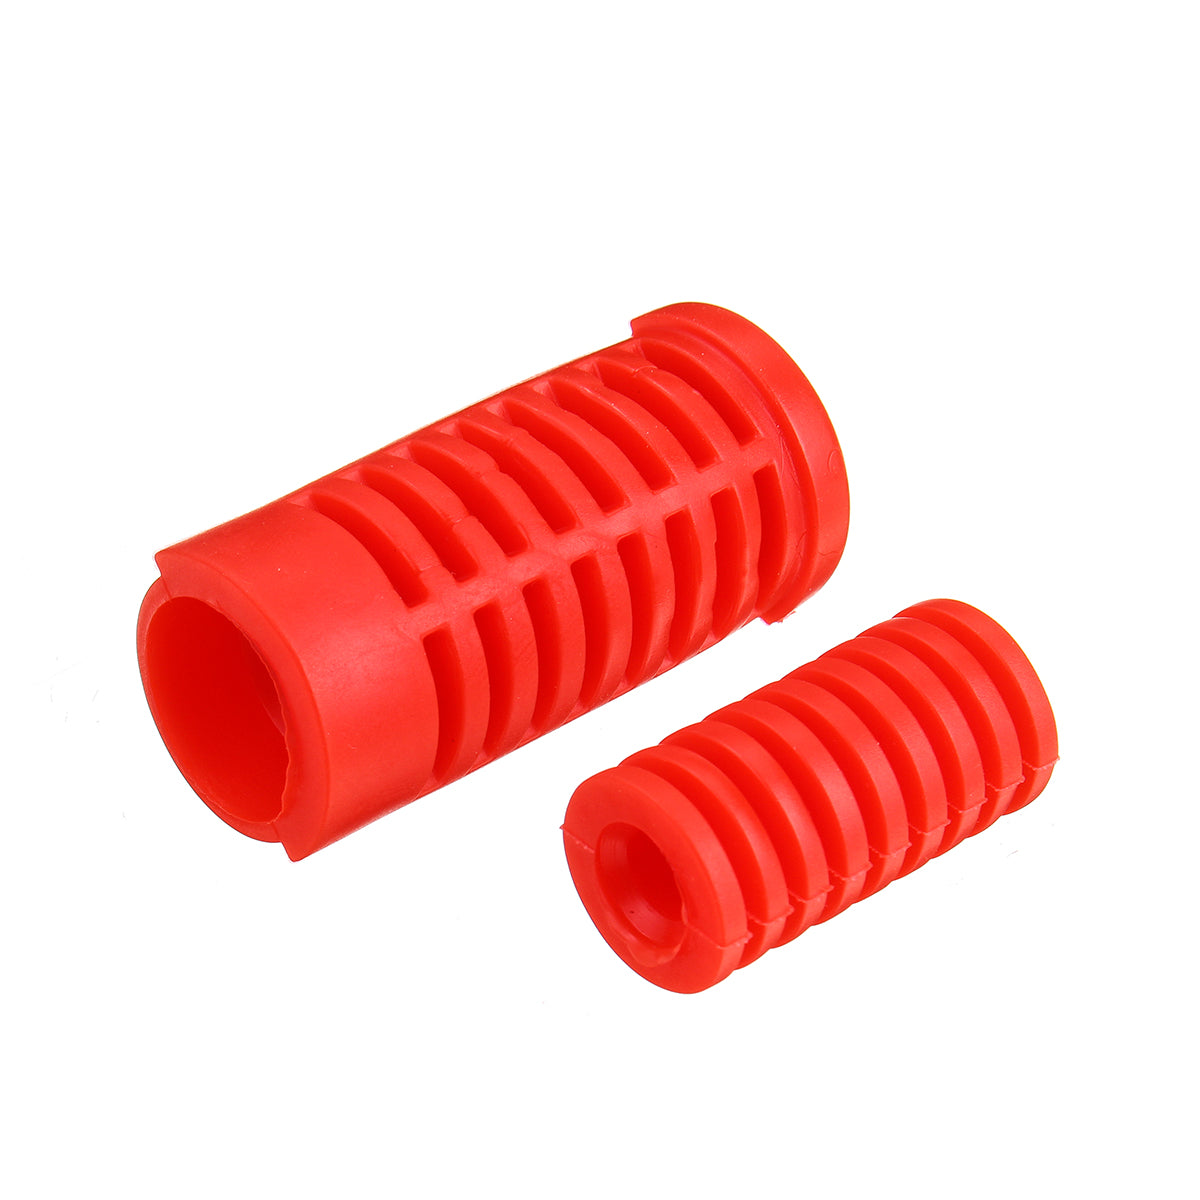 Orange Red Foot Pad Pegs Cover Foot-Operated Left Shift Lever Pedal Toe Motorcycle Universal